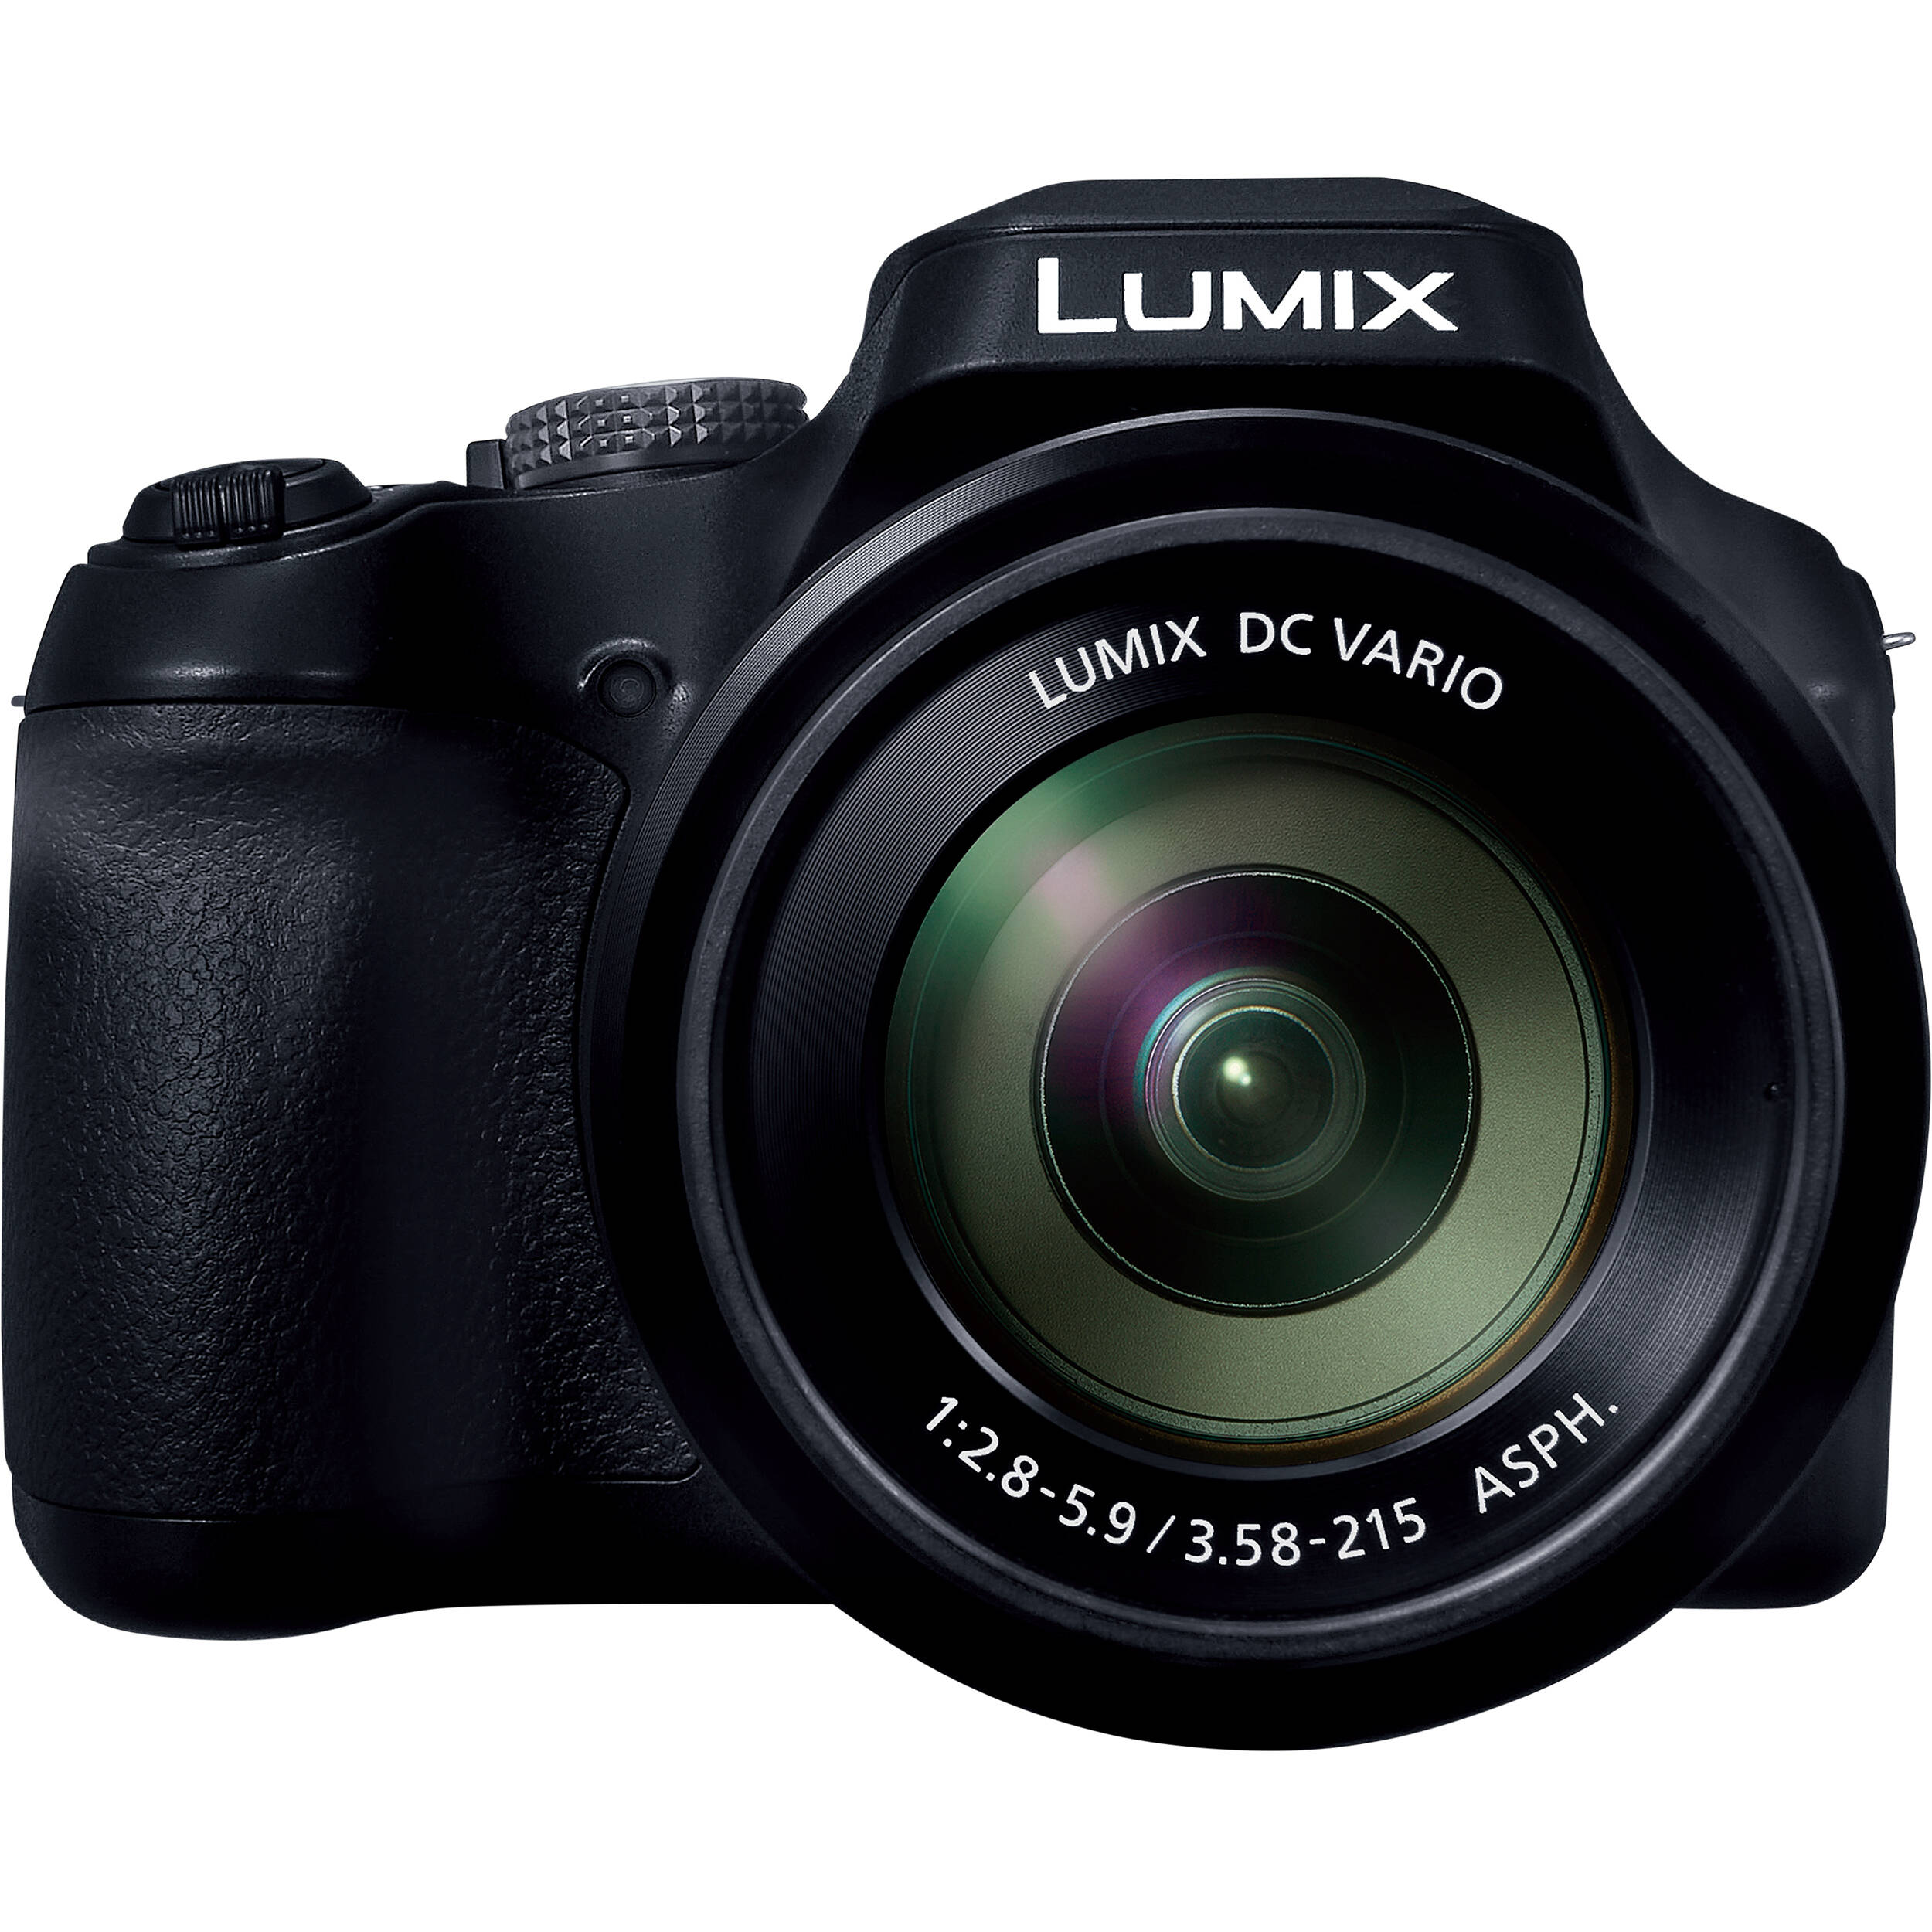 Capture Clear Moments Near and Far with the Panasonic Lumix FZ80D